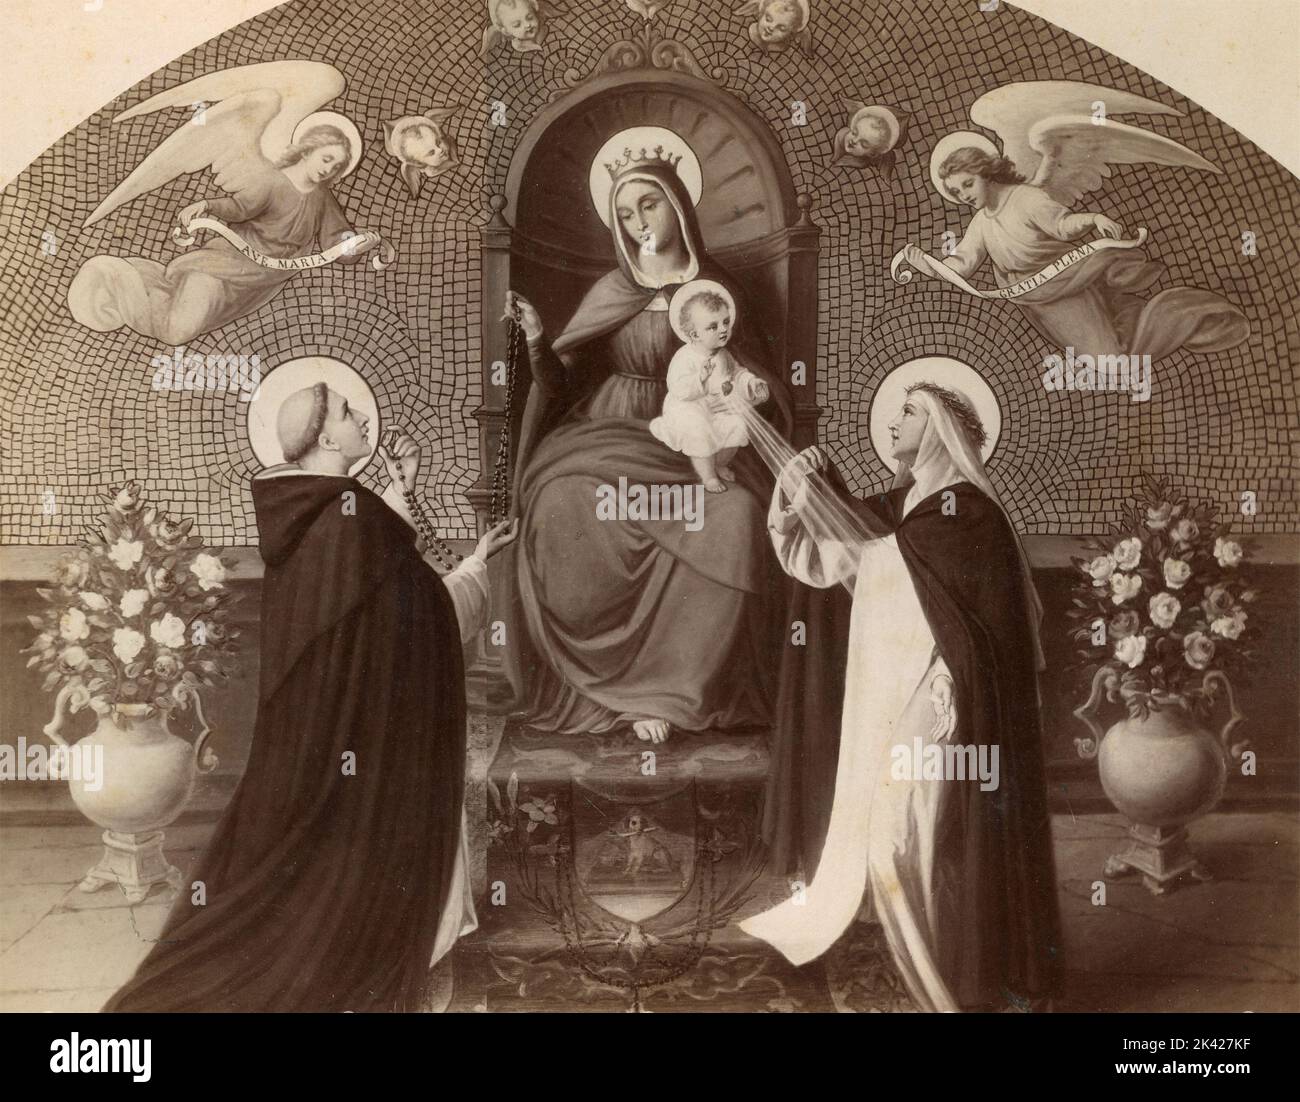 The Virgin Mary enthroned gives S. Dominic of Guzman a rosary, painting by Italian artist Silverio Capparoni, 1870s Stock Photo